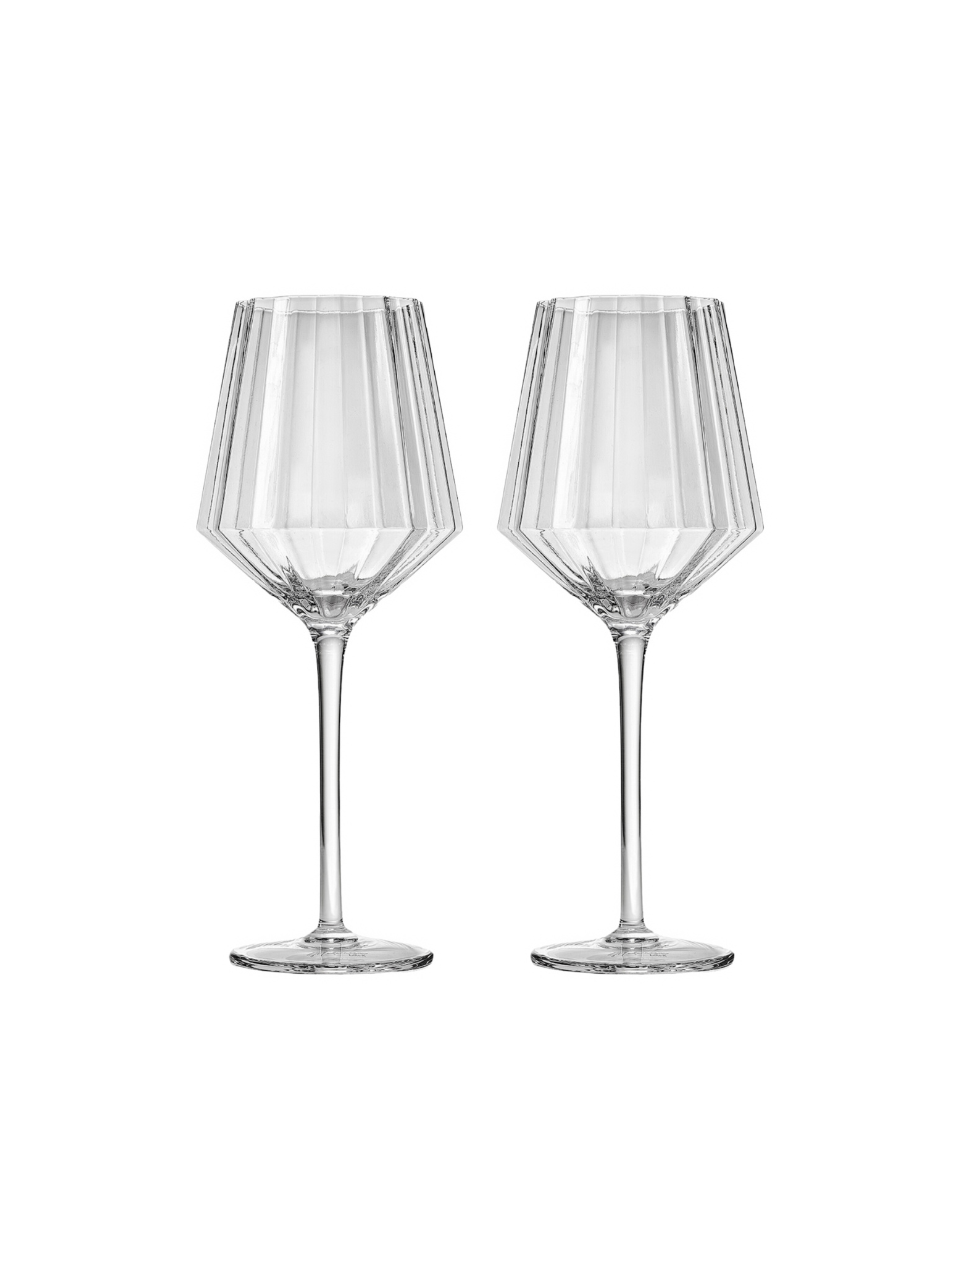 MODERNISM | Cullinan Crystal Red Wine Glasses